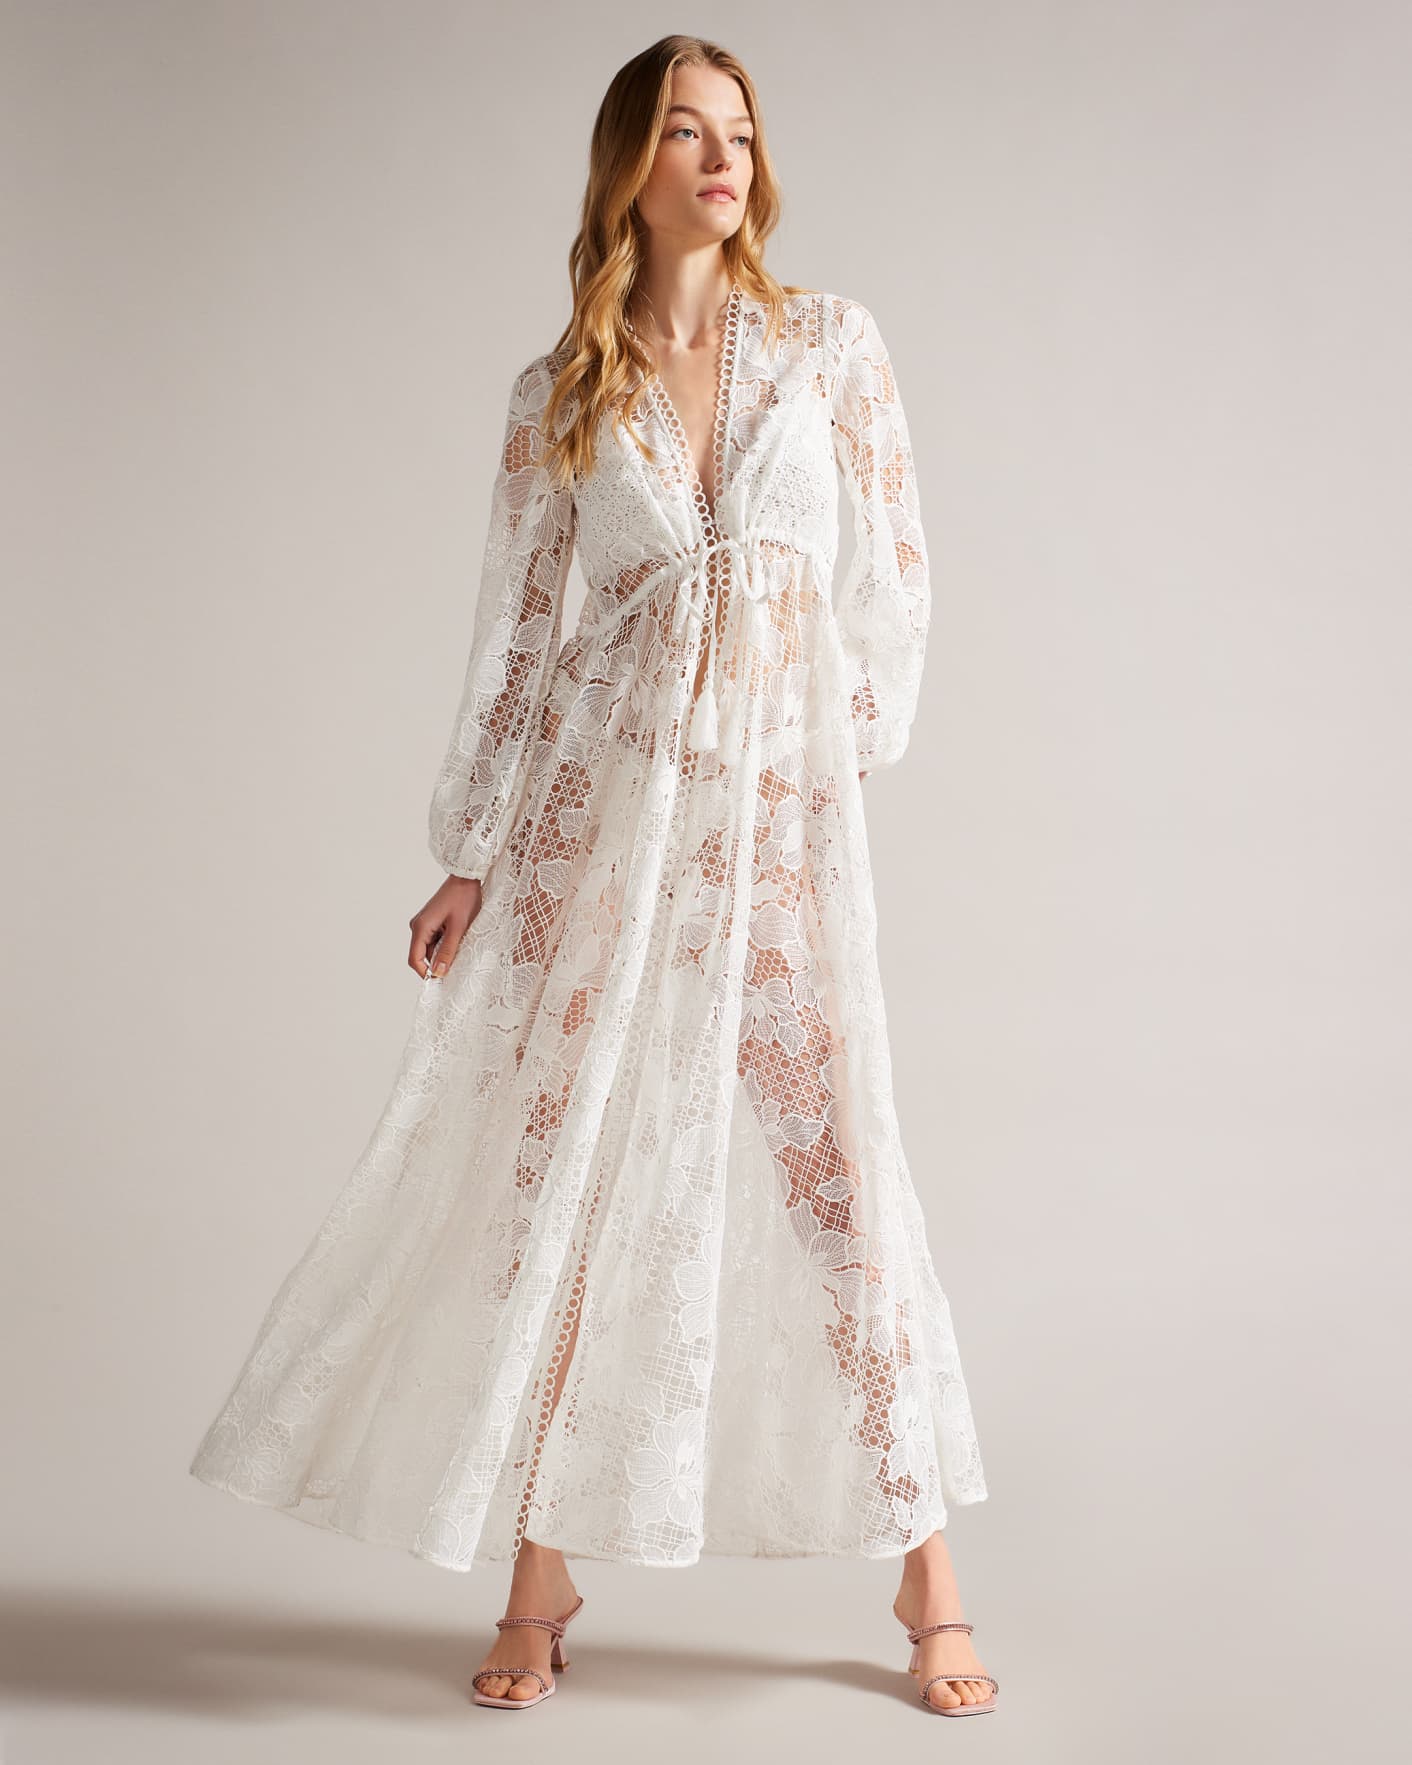 White Ted Baker Lace Beach Dress